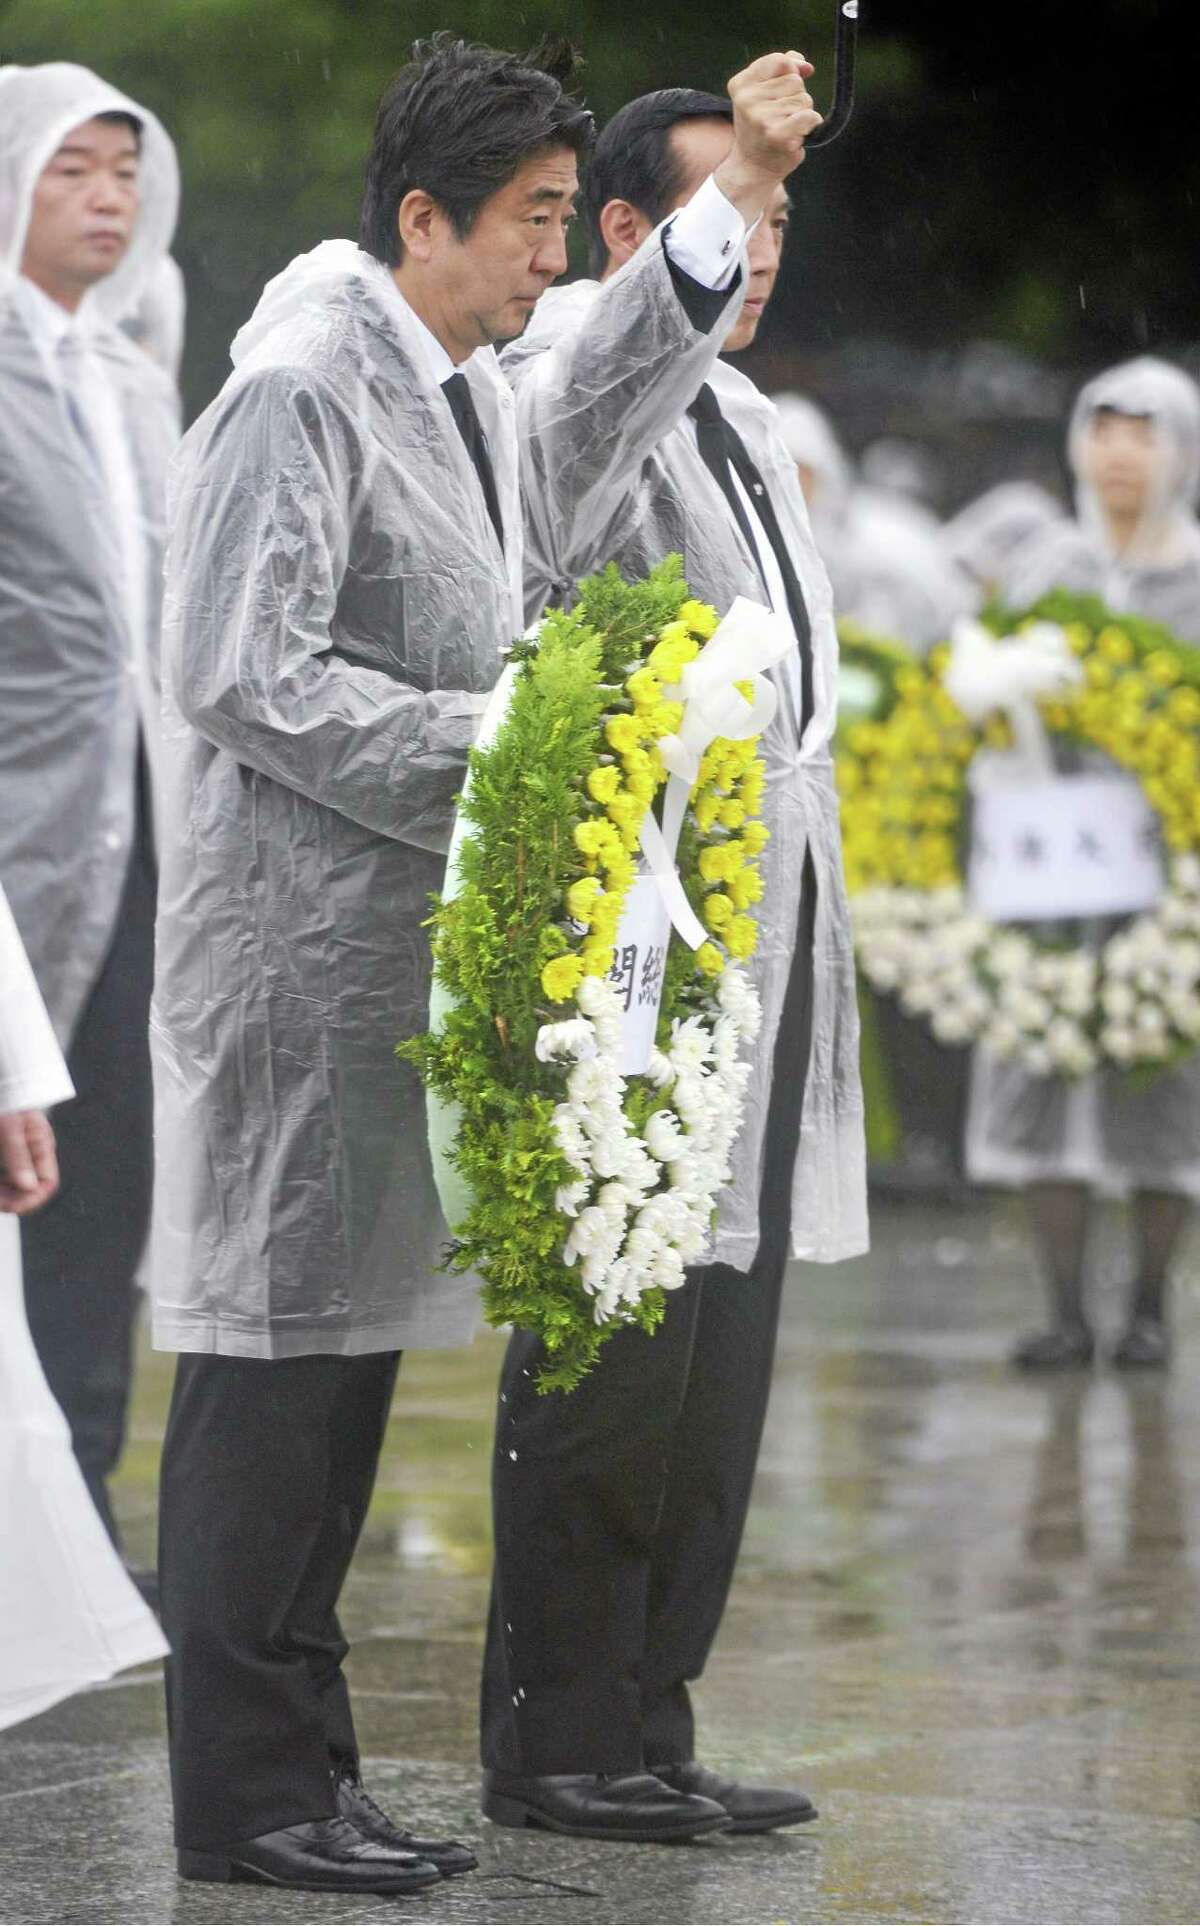 Japan's Prime Minister Shinzo Abe, center left, offers flowers to the atomic bomb victims during a ceremony at the Hiroshima Peace Memorial Park in Hiroshima, western Japan, Wednesday, Aug. 6, 2014. Japan marked the 69th anniversary Wednesday of the atomic bombing of Hiroshima. (AP Photo/Kyodo News) JAPAN OUT, MANDATORY CREDIT